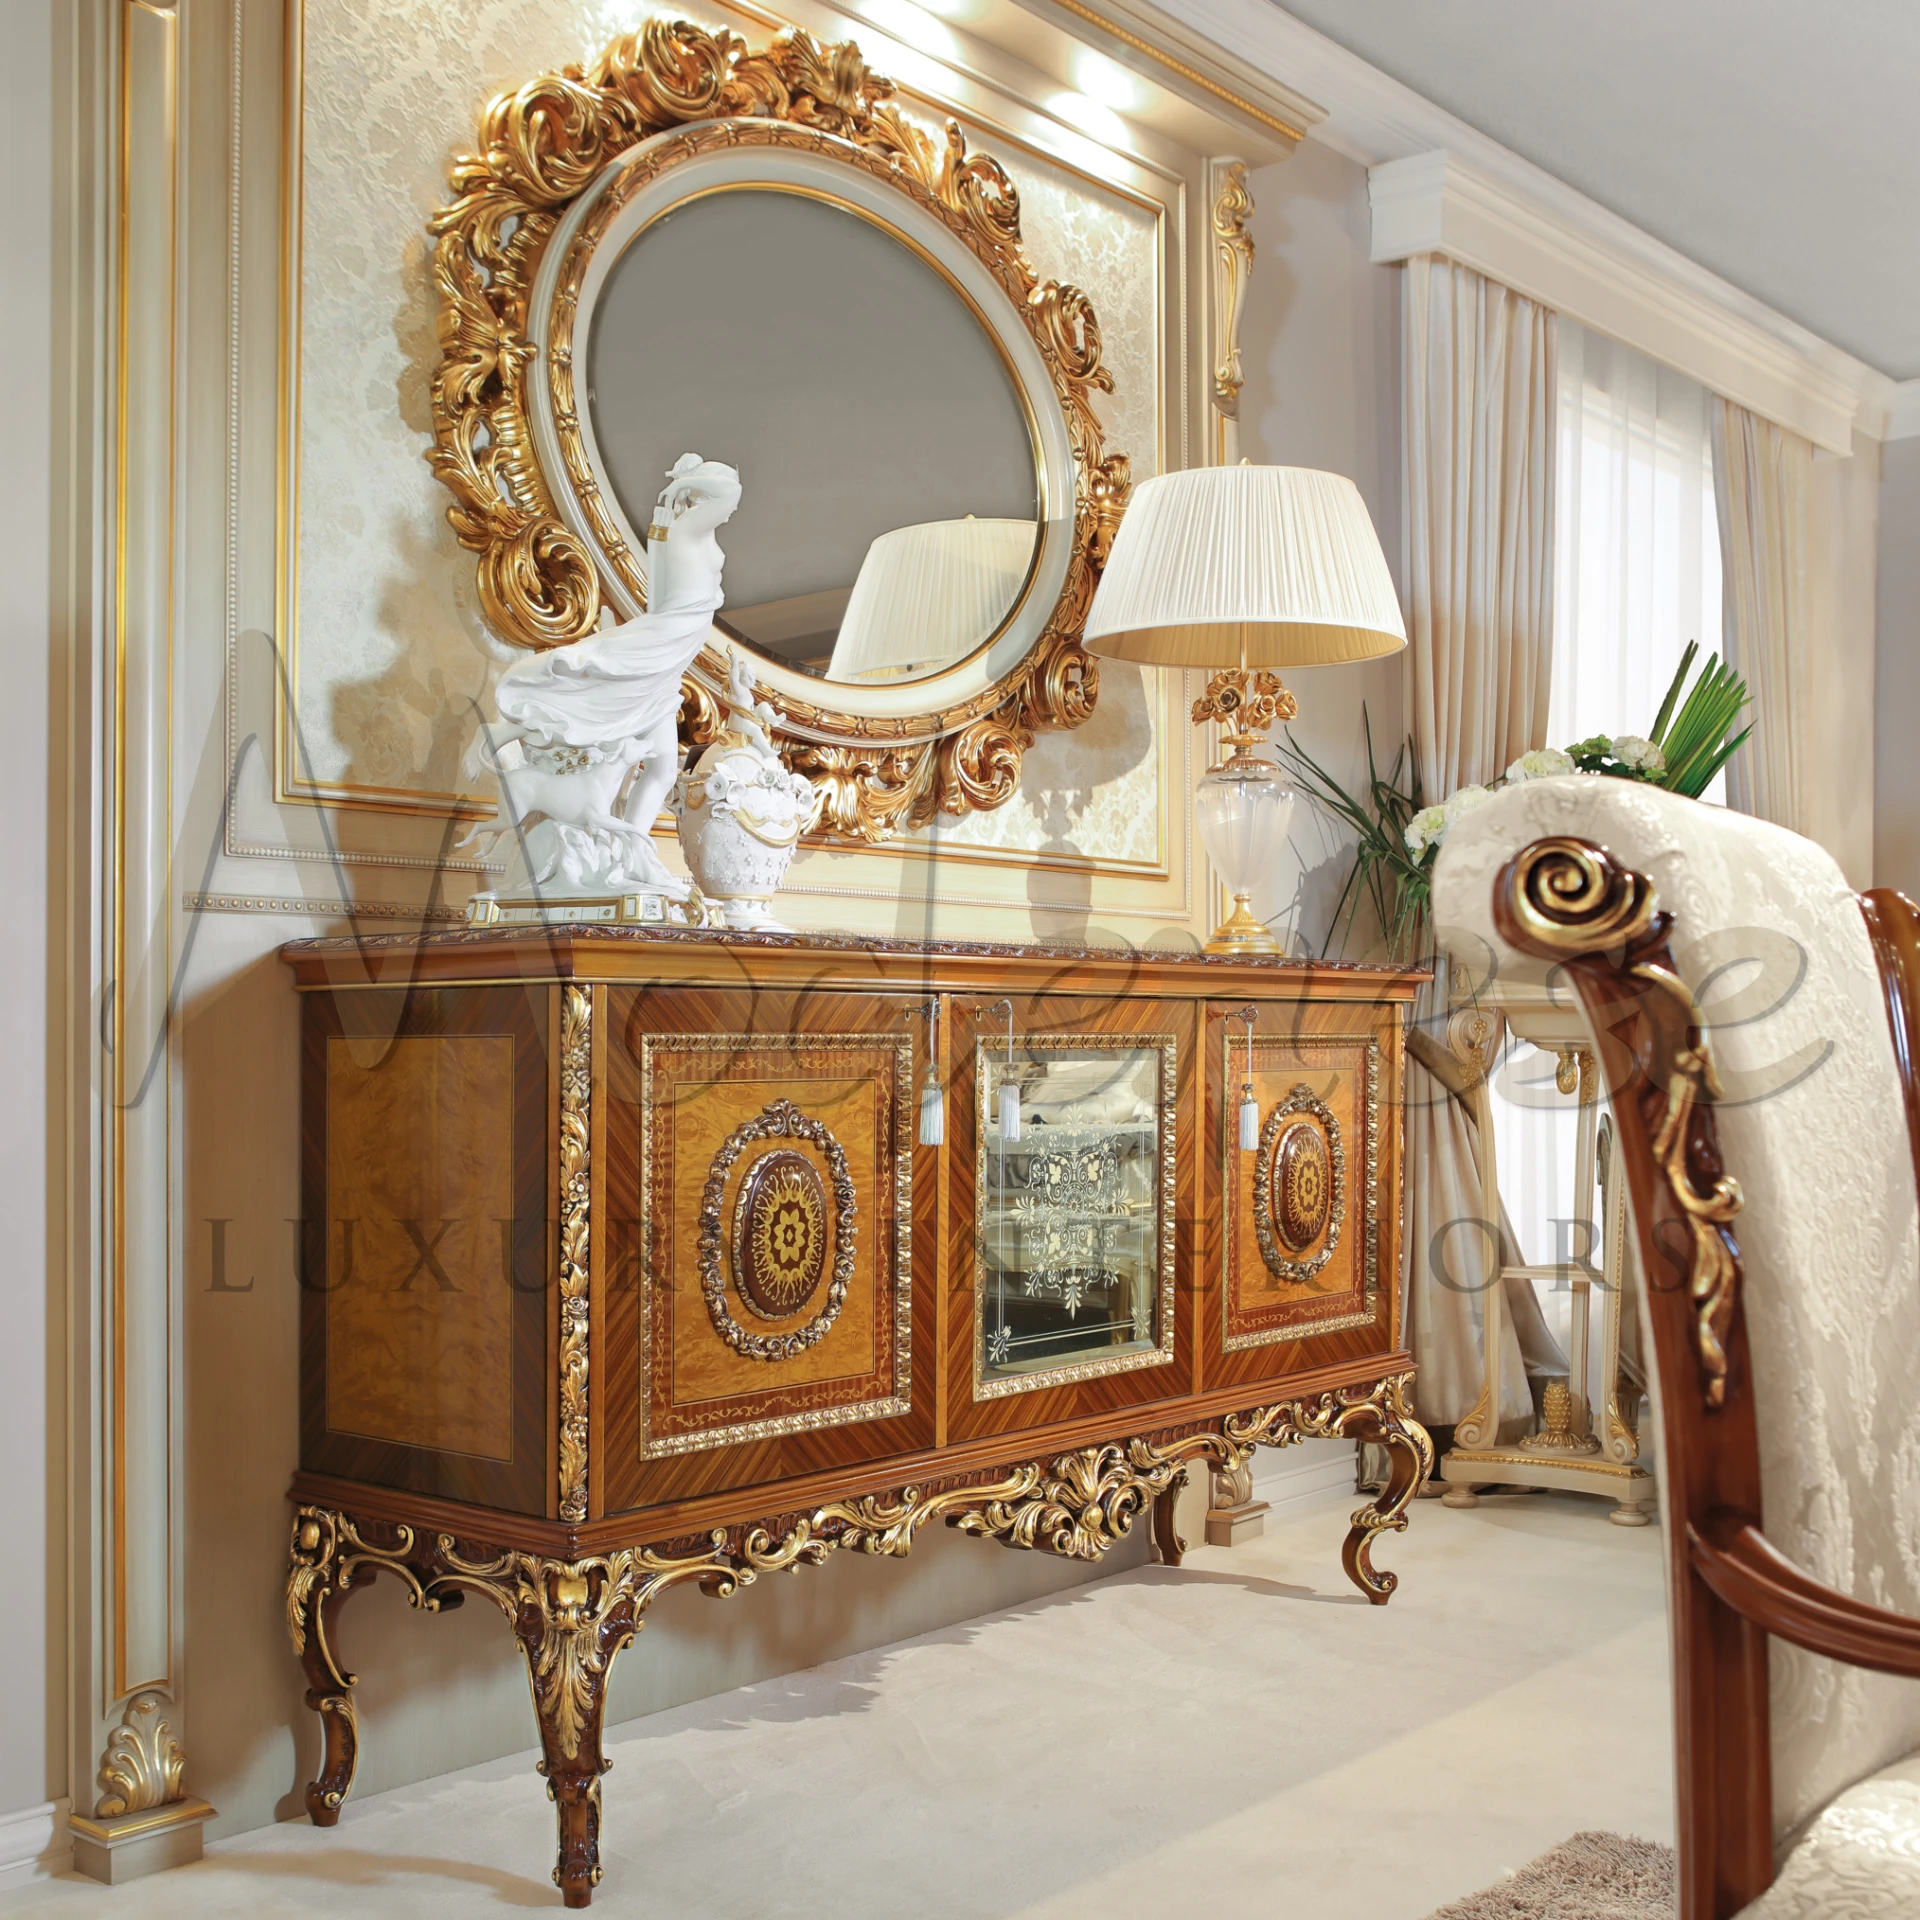 Luxurious Wooden Sideboard with hard designs, furnished by a golden framed mirror and elegant lamp.